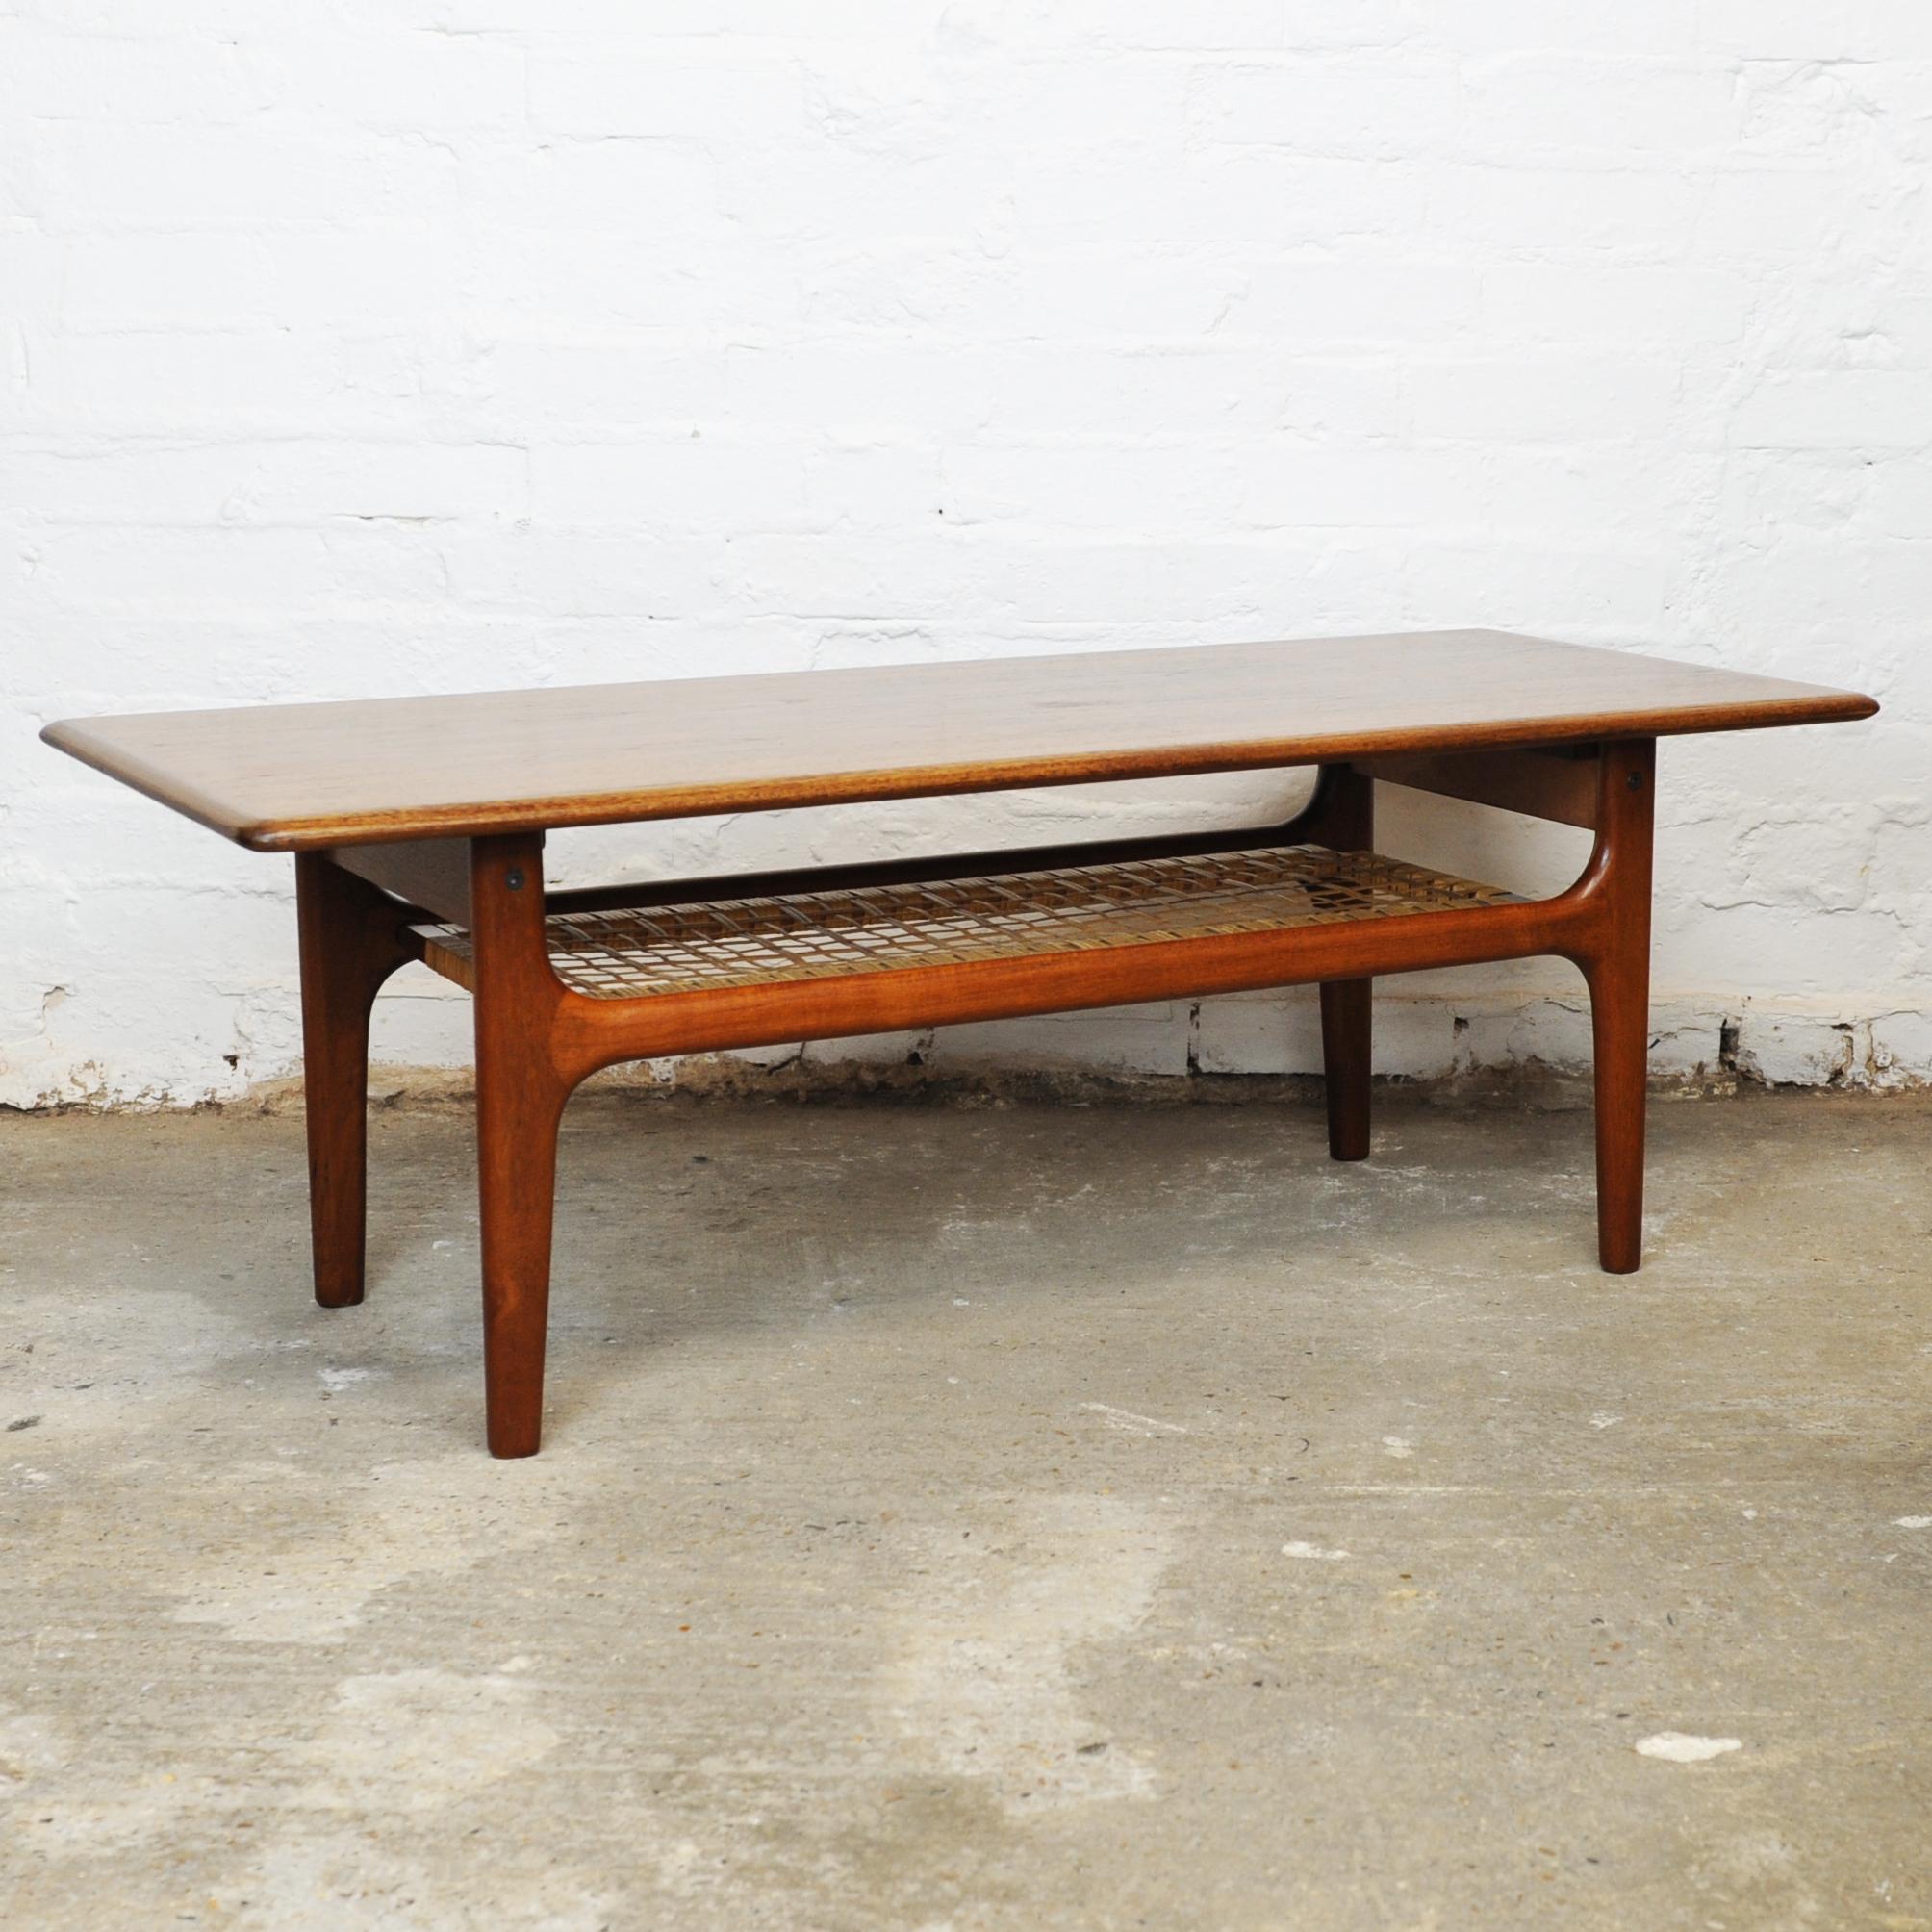 Mid-20th Century Teak and Cane Danish Coffee Table by Trioh Mobler, 1960s For Sale